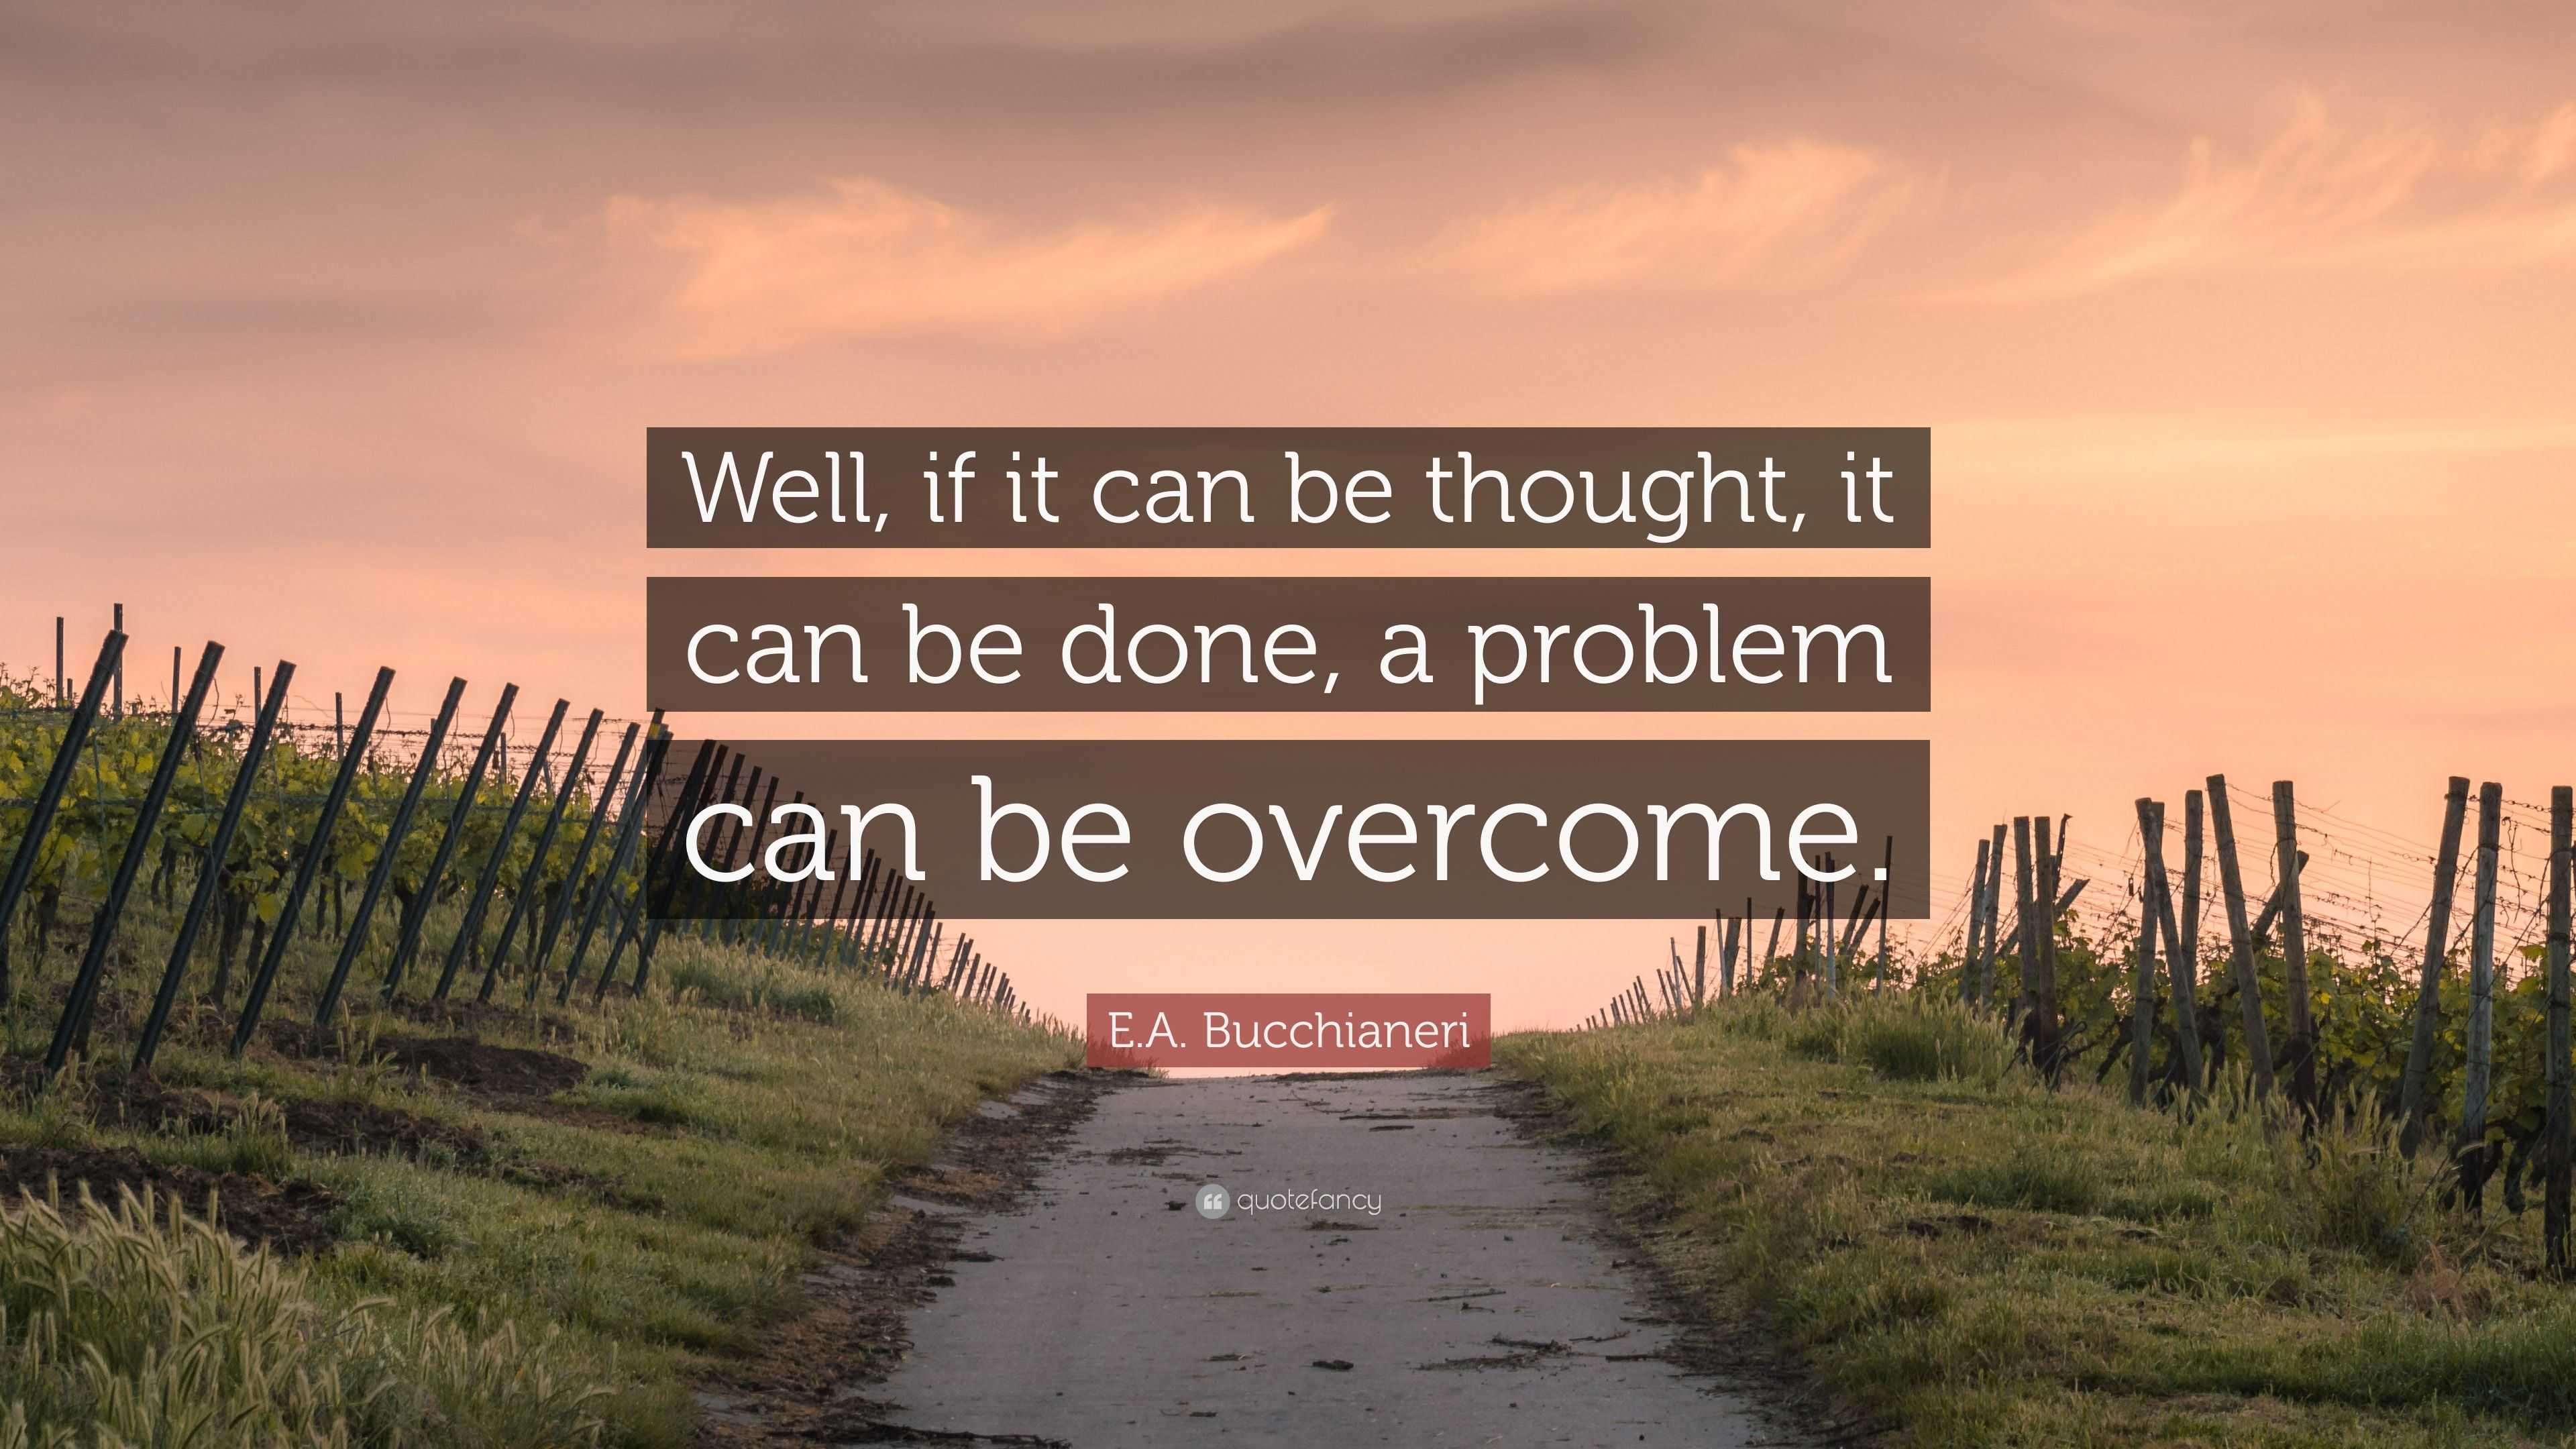 E.A. Bucchianeri Quote: “Well, if it can be thought, it can be done, a ...